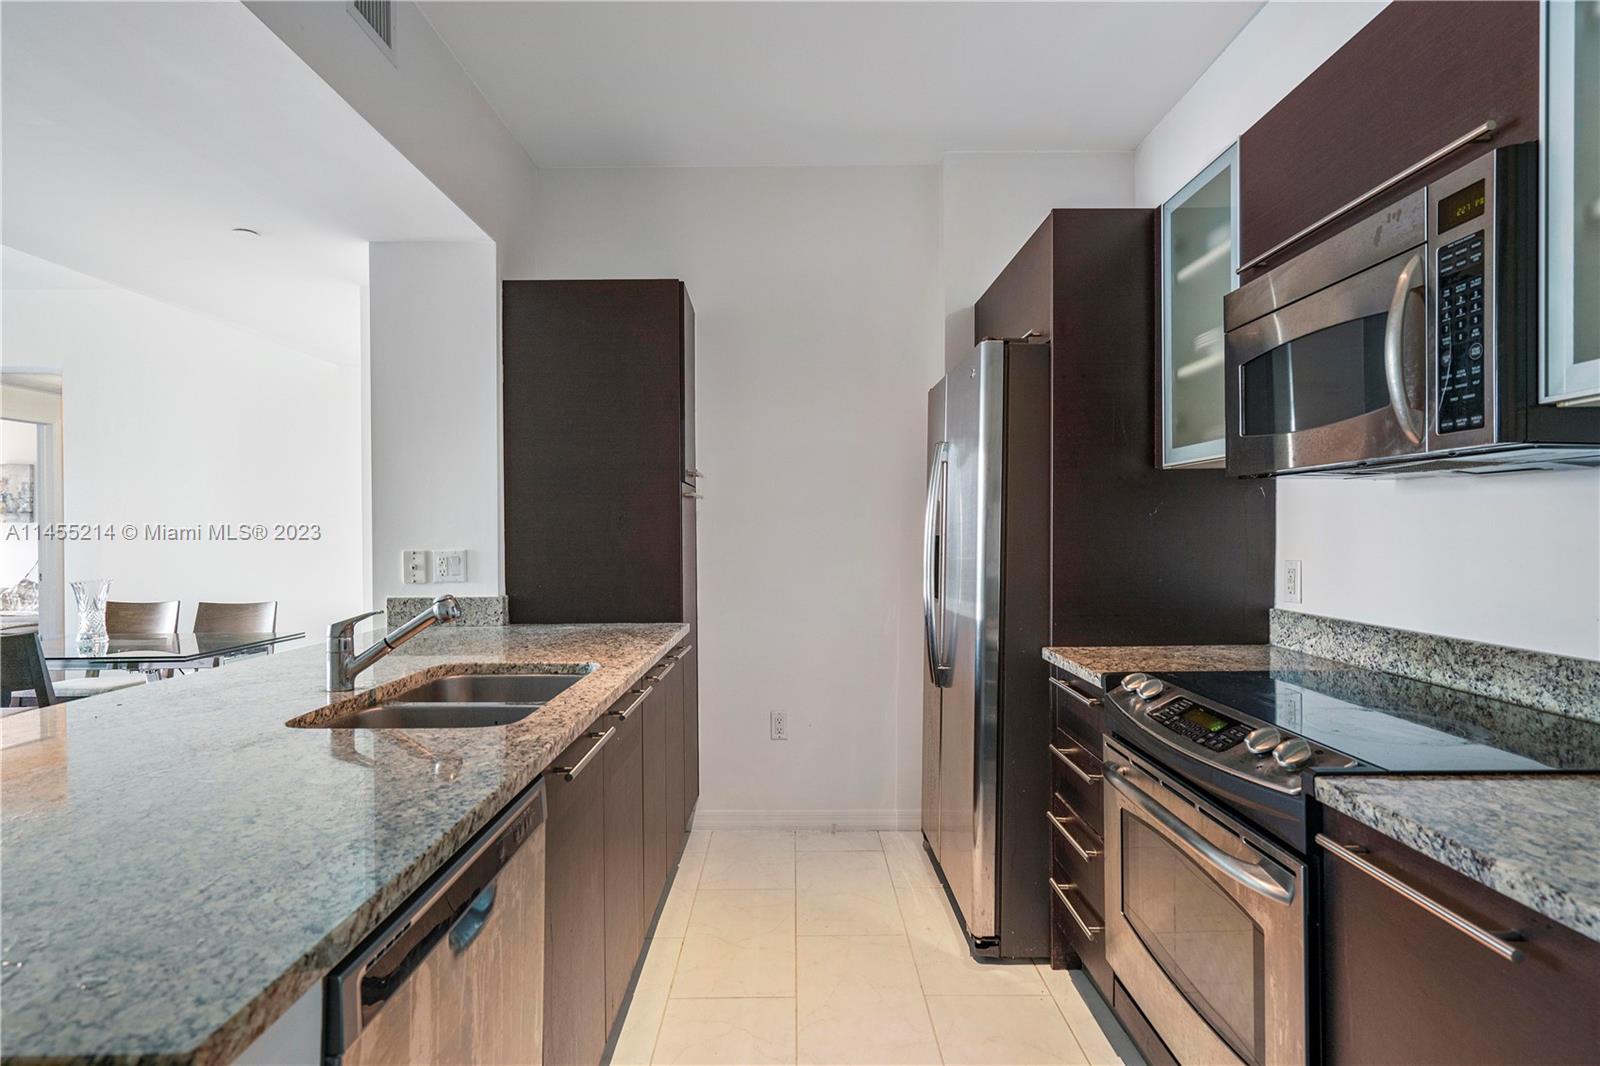 Captivating 2 Bed, 2 Bath Residence at The Plaza on Brickell Ave - Ideal for Investors!

Discover 